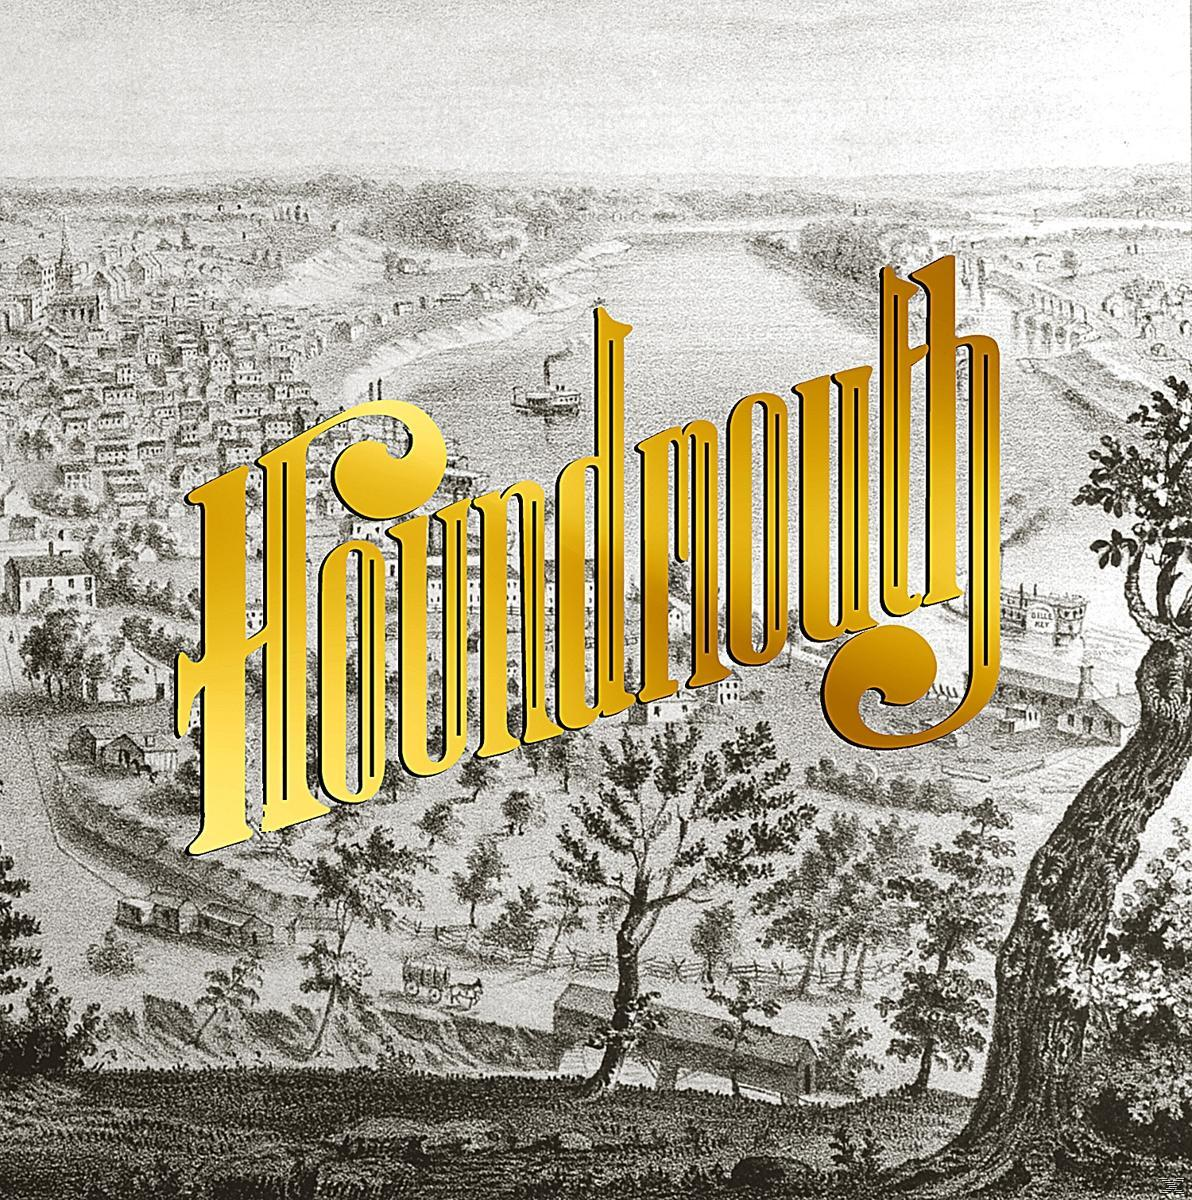 Houndmouth City (CD) - Below The Hills From The -